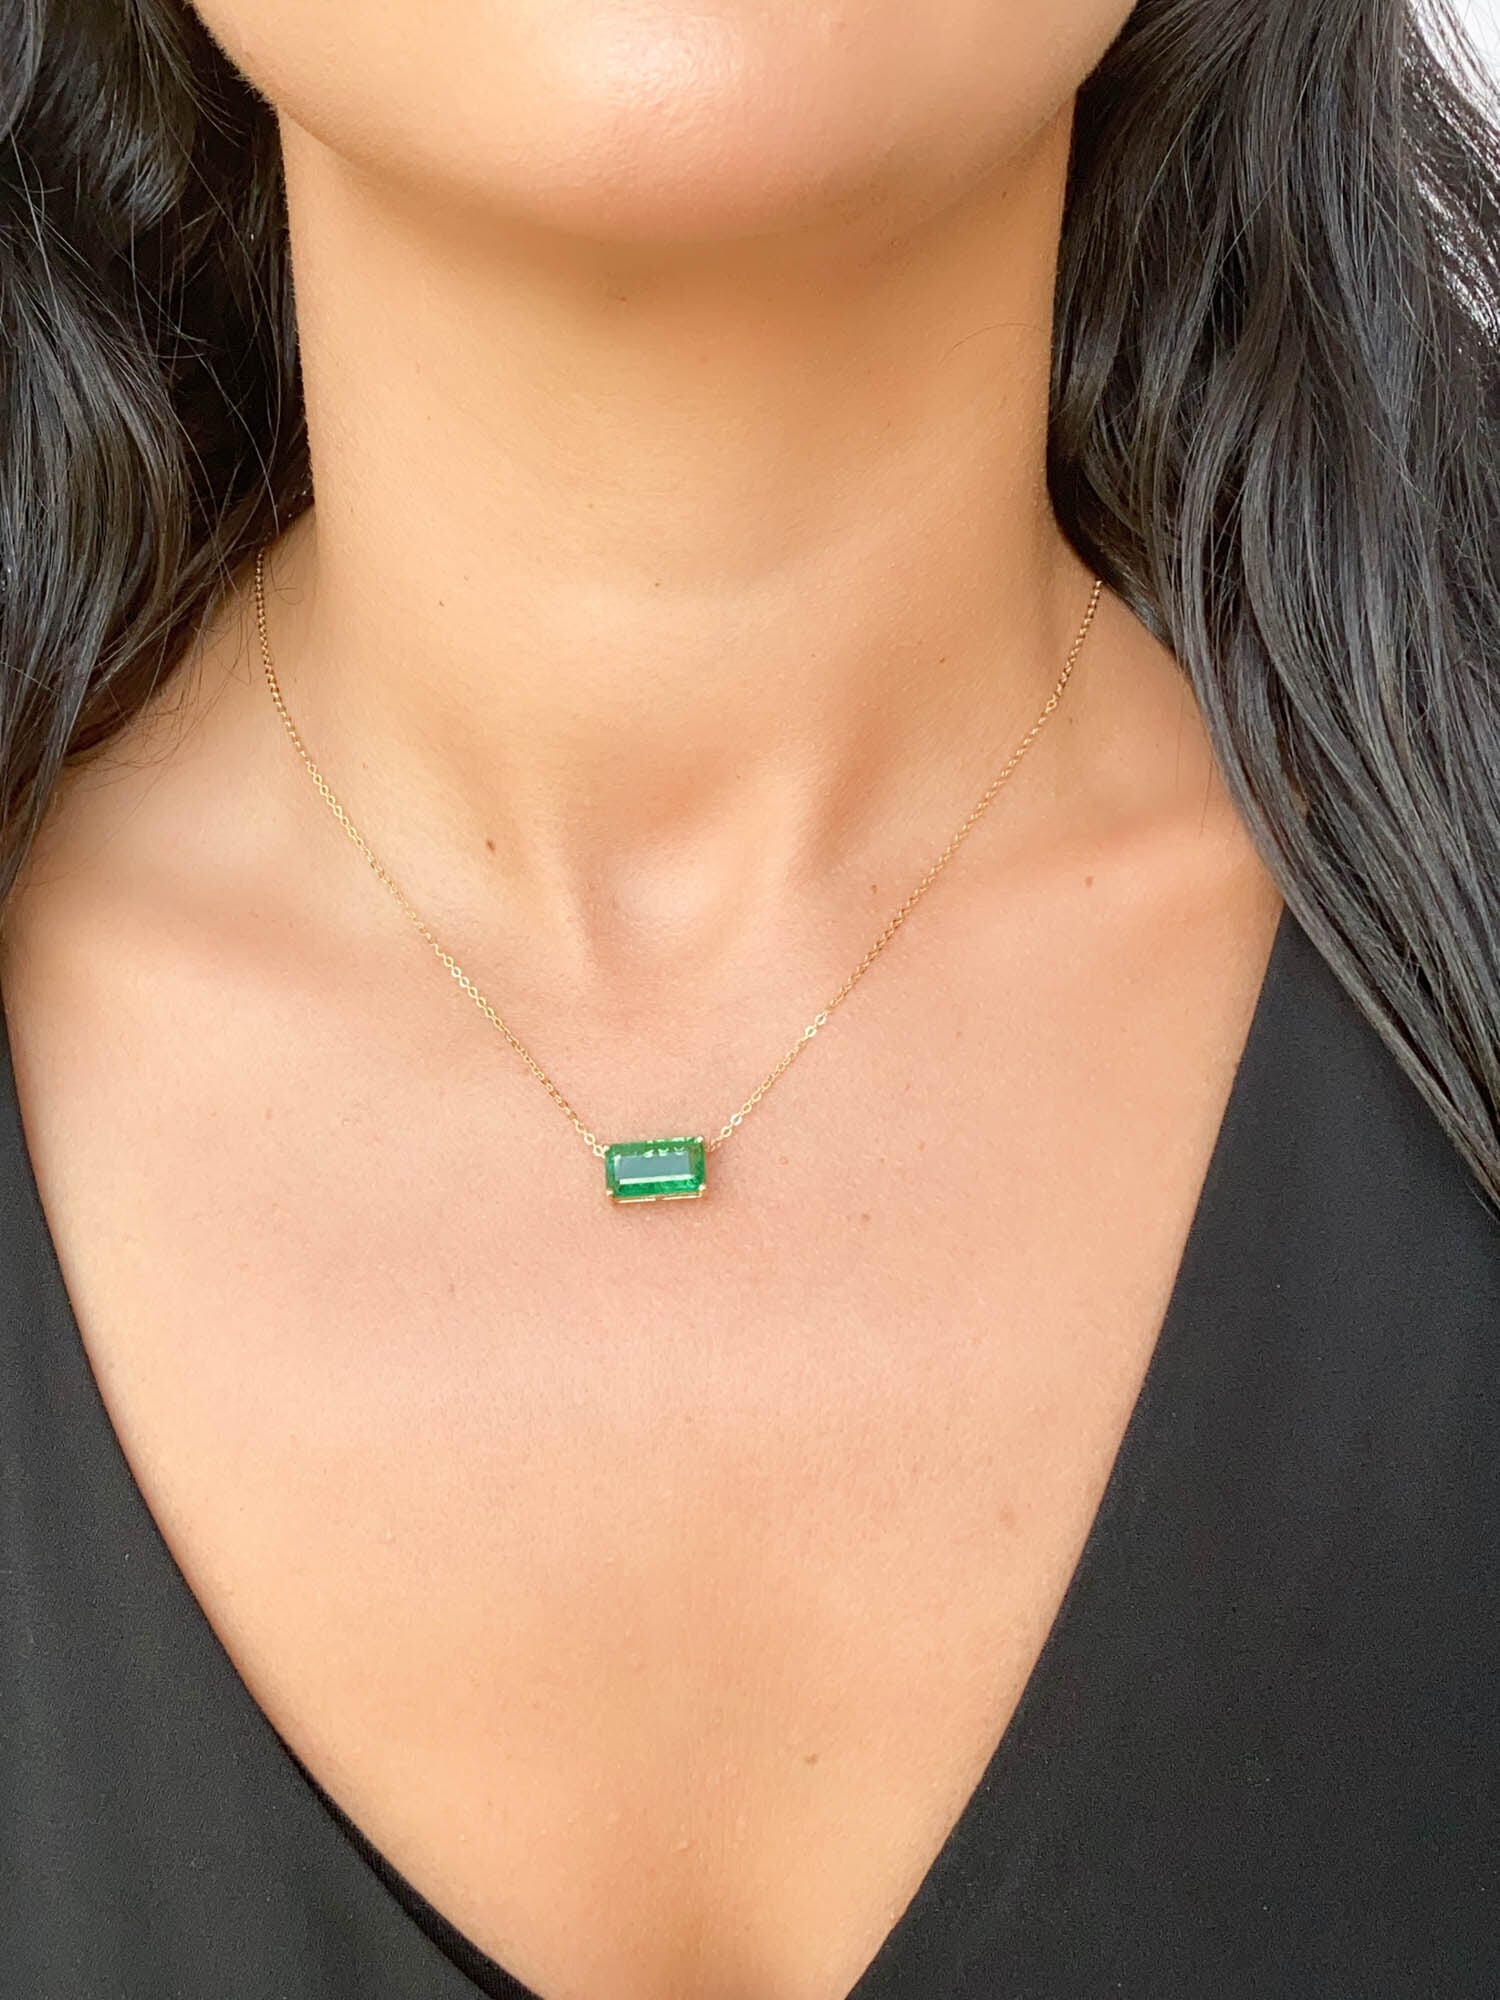 Emerald Green Necklace With Silver Sterling Chain – MindfulSouls